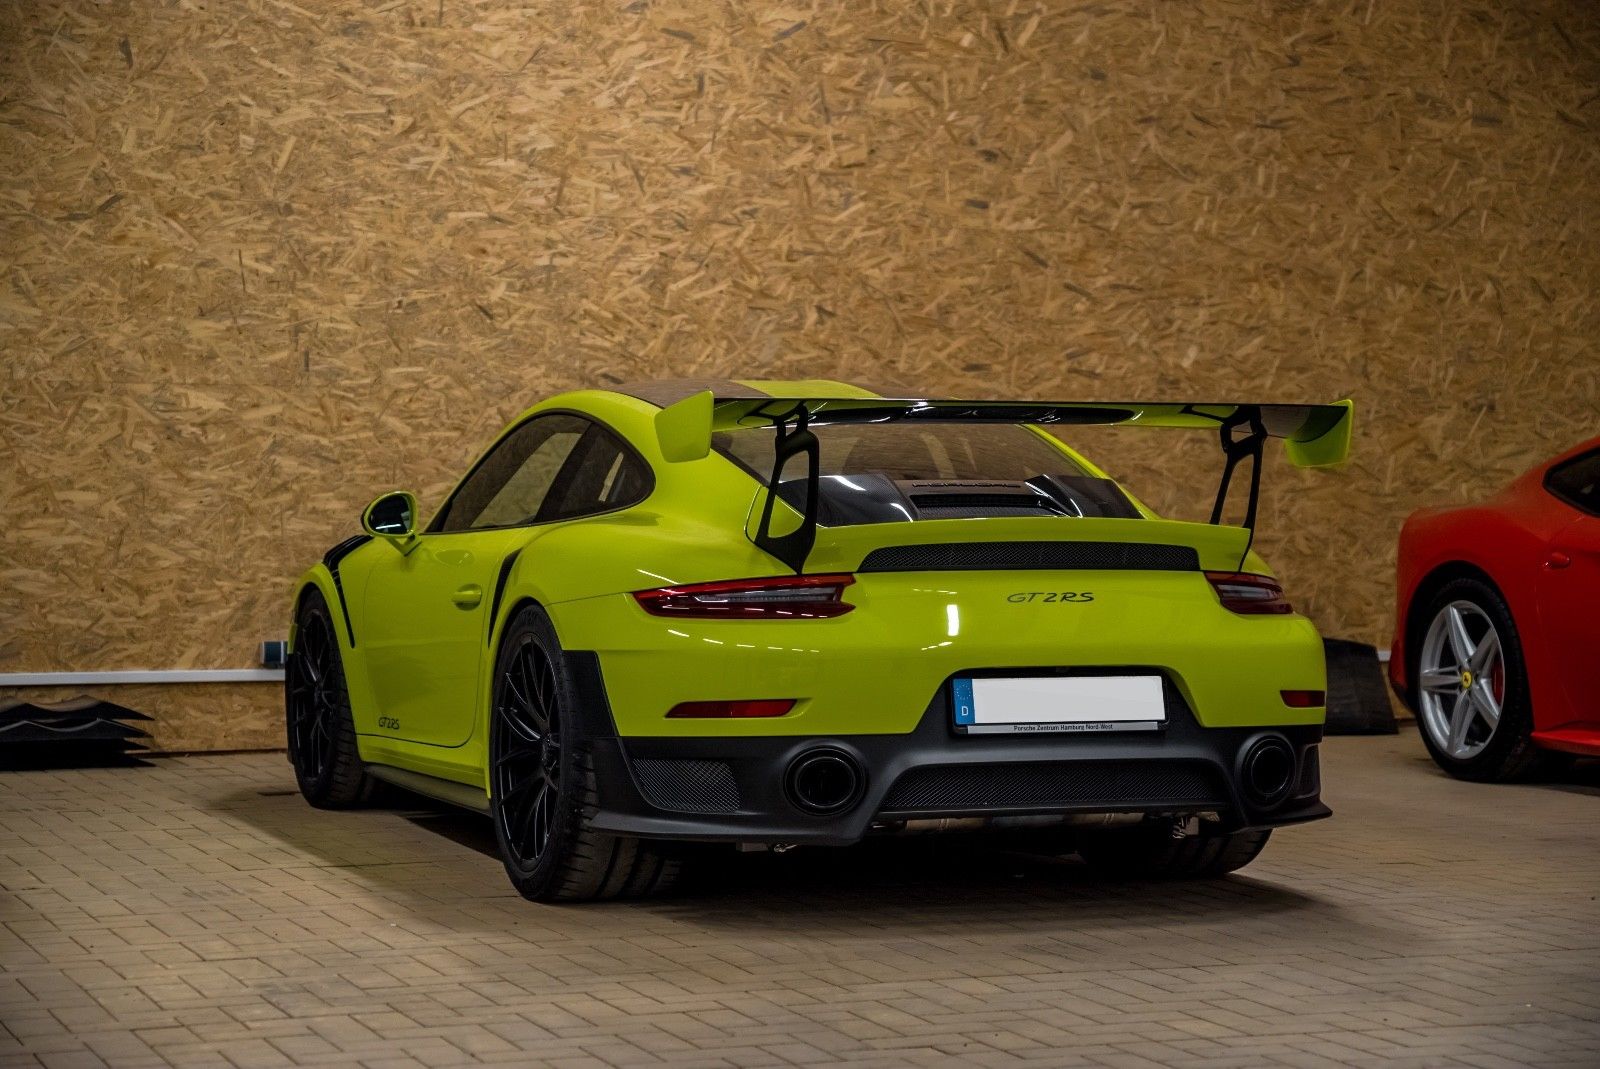 Porsche 911 GT2 RS Weissach Exclusive - Luxury Pulse Cars - Germany